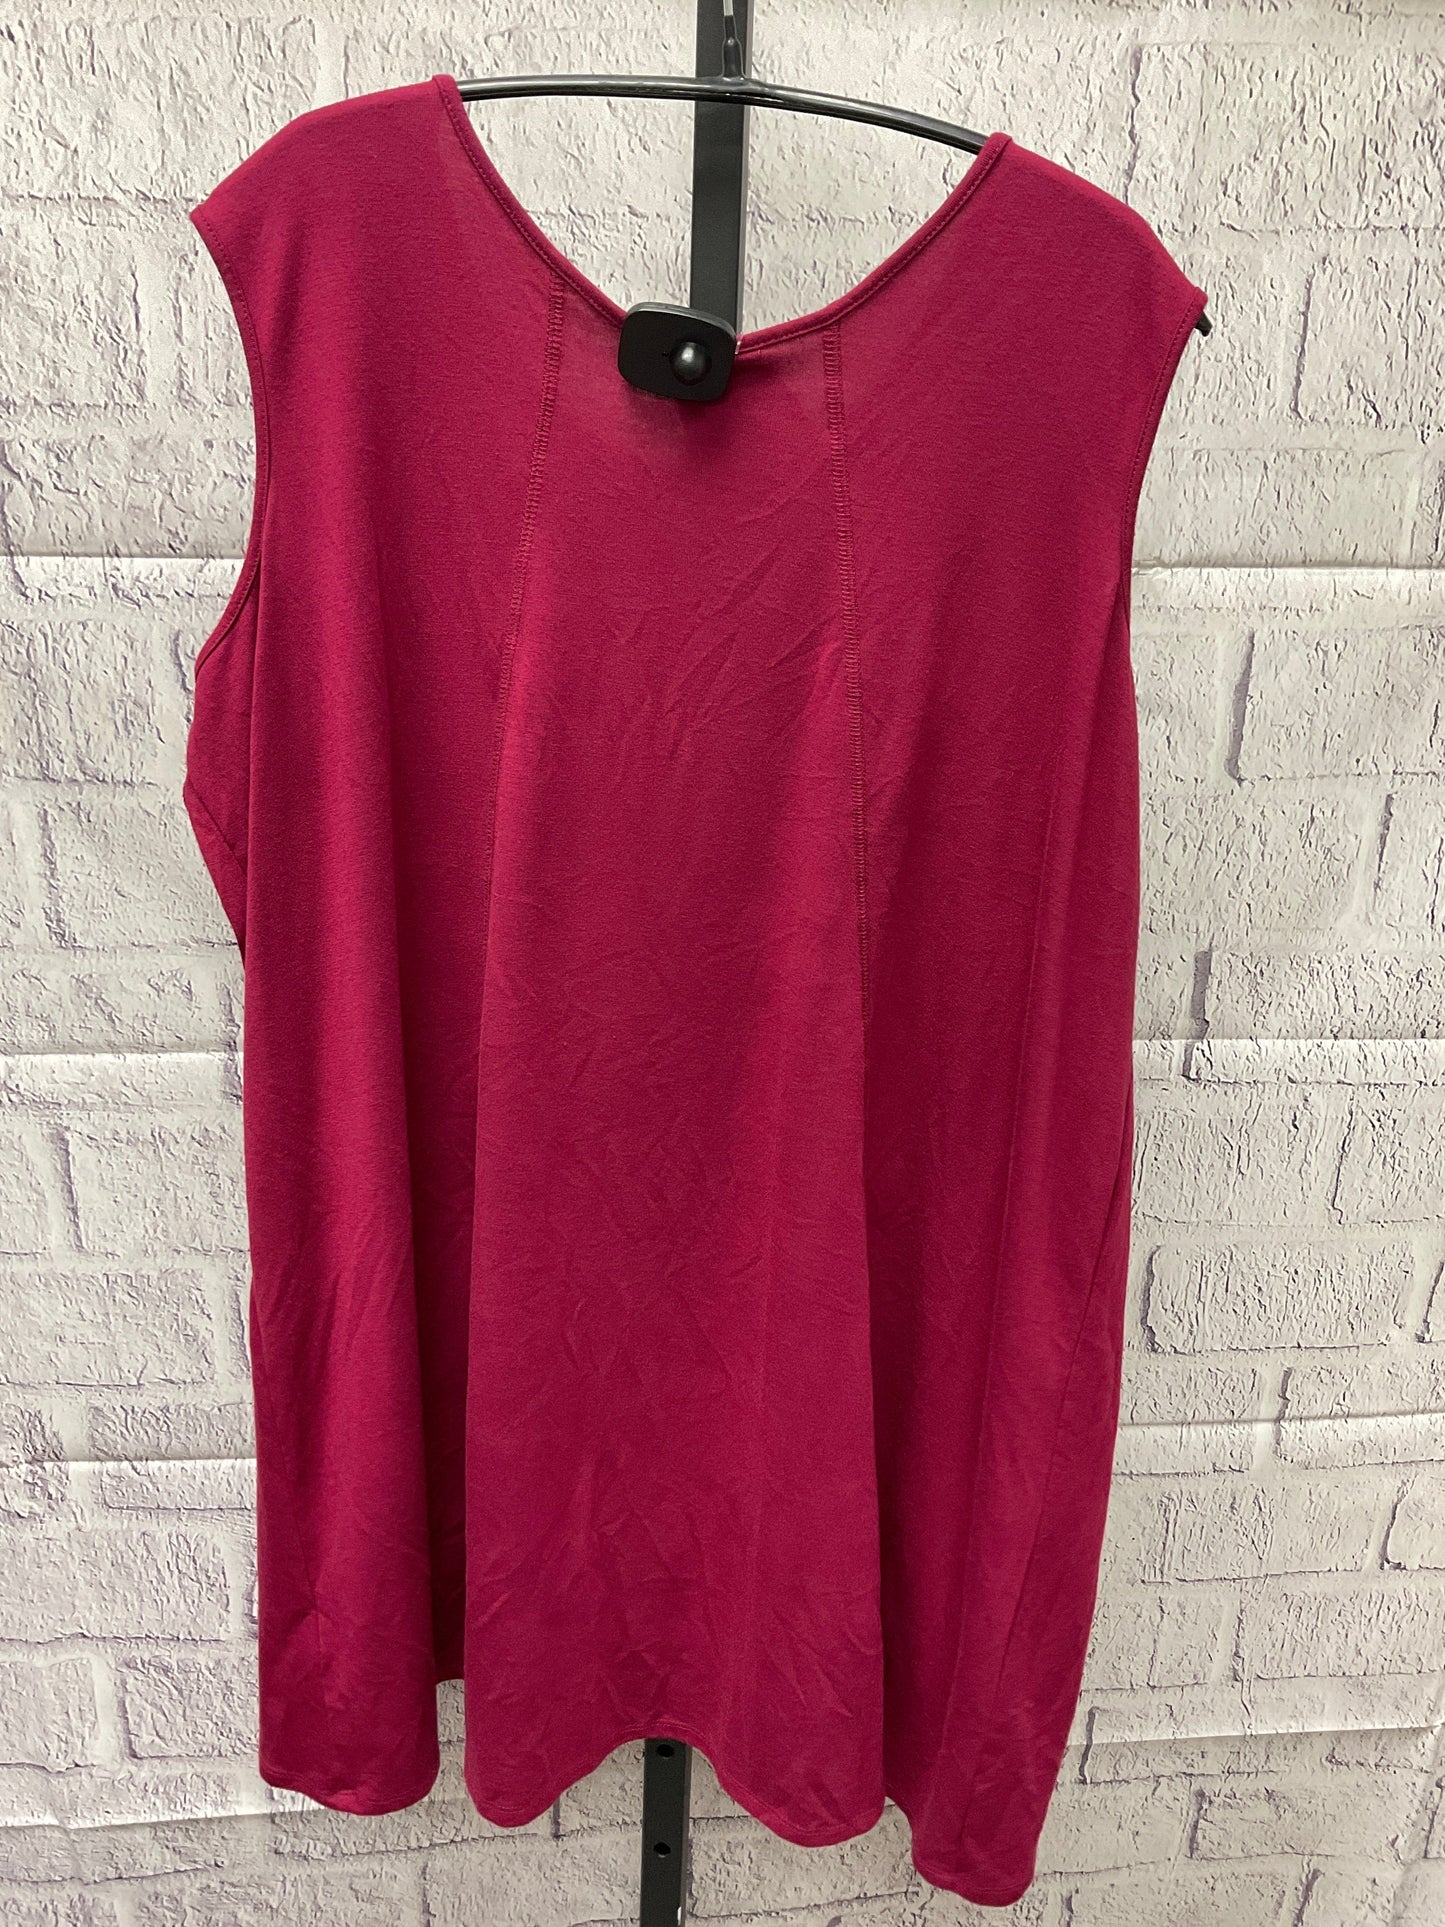 Top Sleeveless Basic By Clothes Mentor  Size: 1x